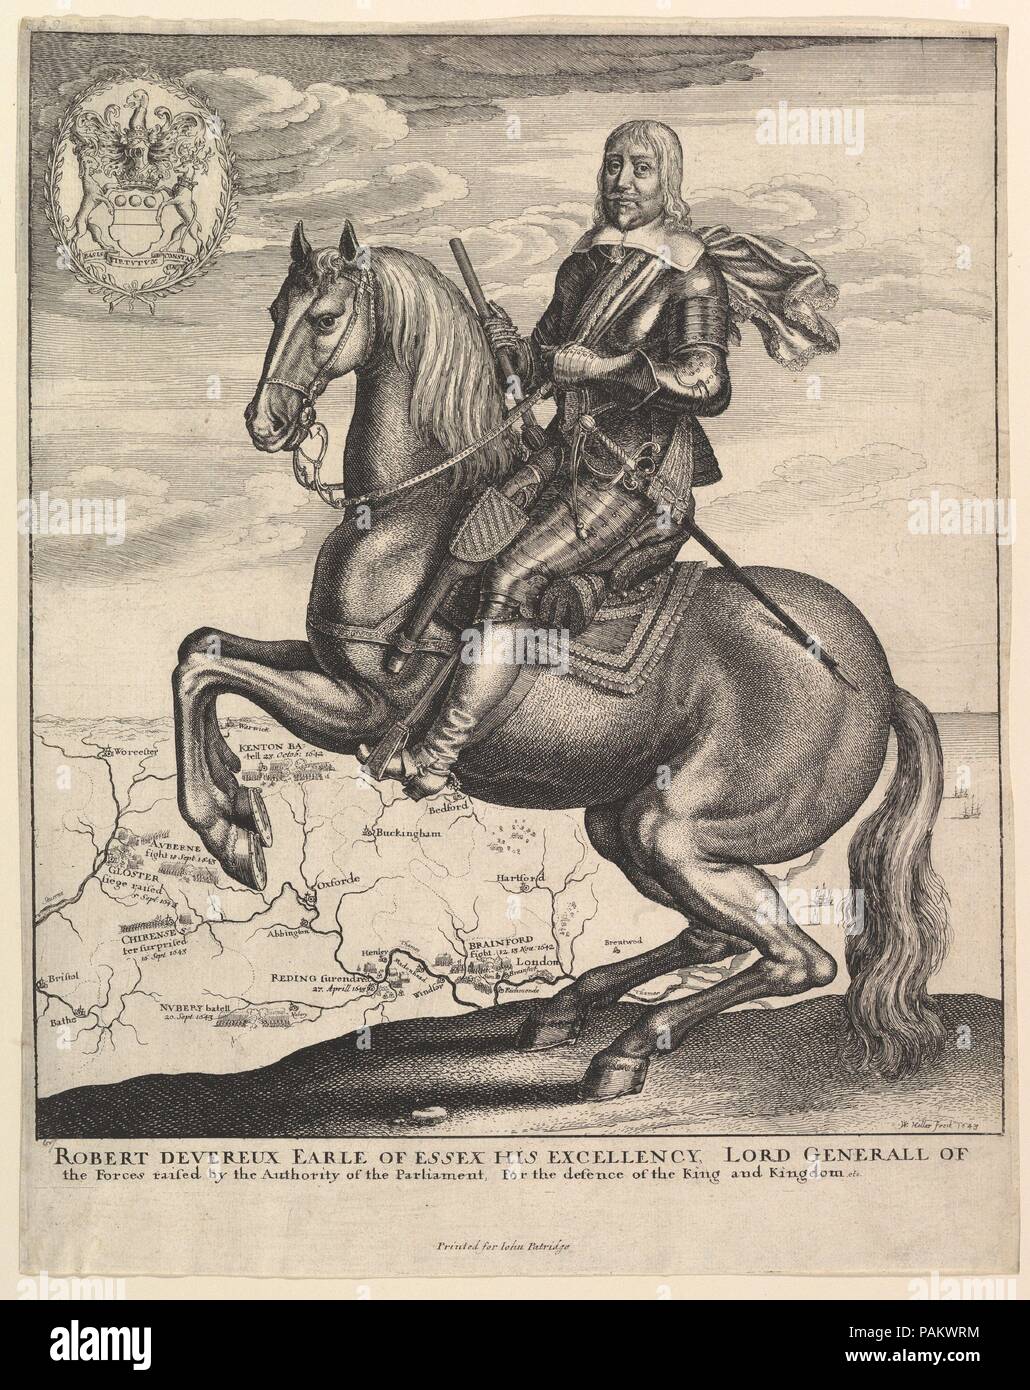 Earl of Essex on Horseback. Artist: Wenceslaus Hollar (Bohemian, Prague 1607-1677 London). Dimensions: Sheet: 13 5/8 × 10 15/16 in. (34.6 × 27.8 cm). Date: 1643.  Robert Devereux Earle of Essex & Ewe, Viscount Herreford, Lord Ferryes of Chartley, seated wearing armor on a prancing horse with a map of his victories in the background. Museum: Metropolitan Museum of Art, New York, USA. Stock Photo